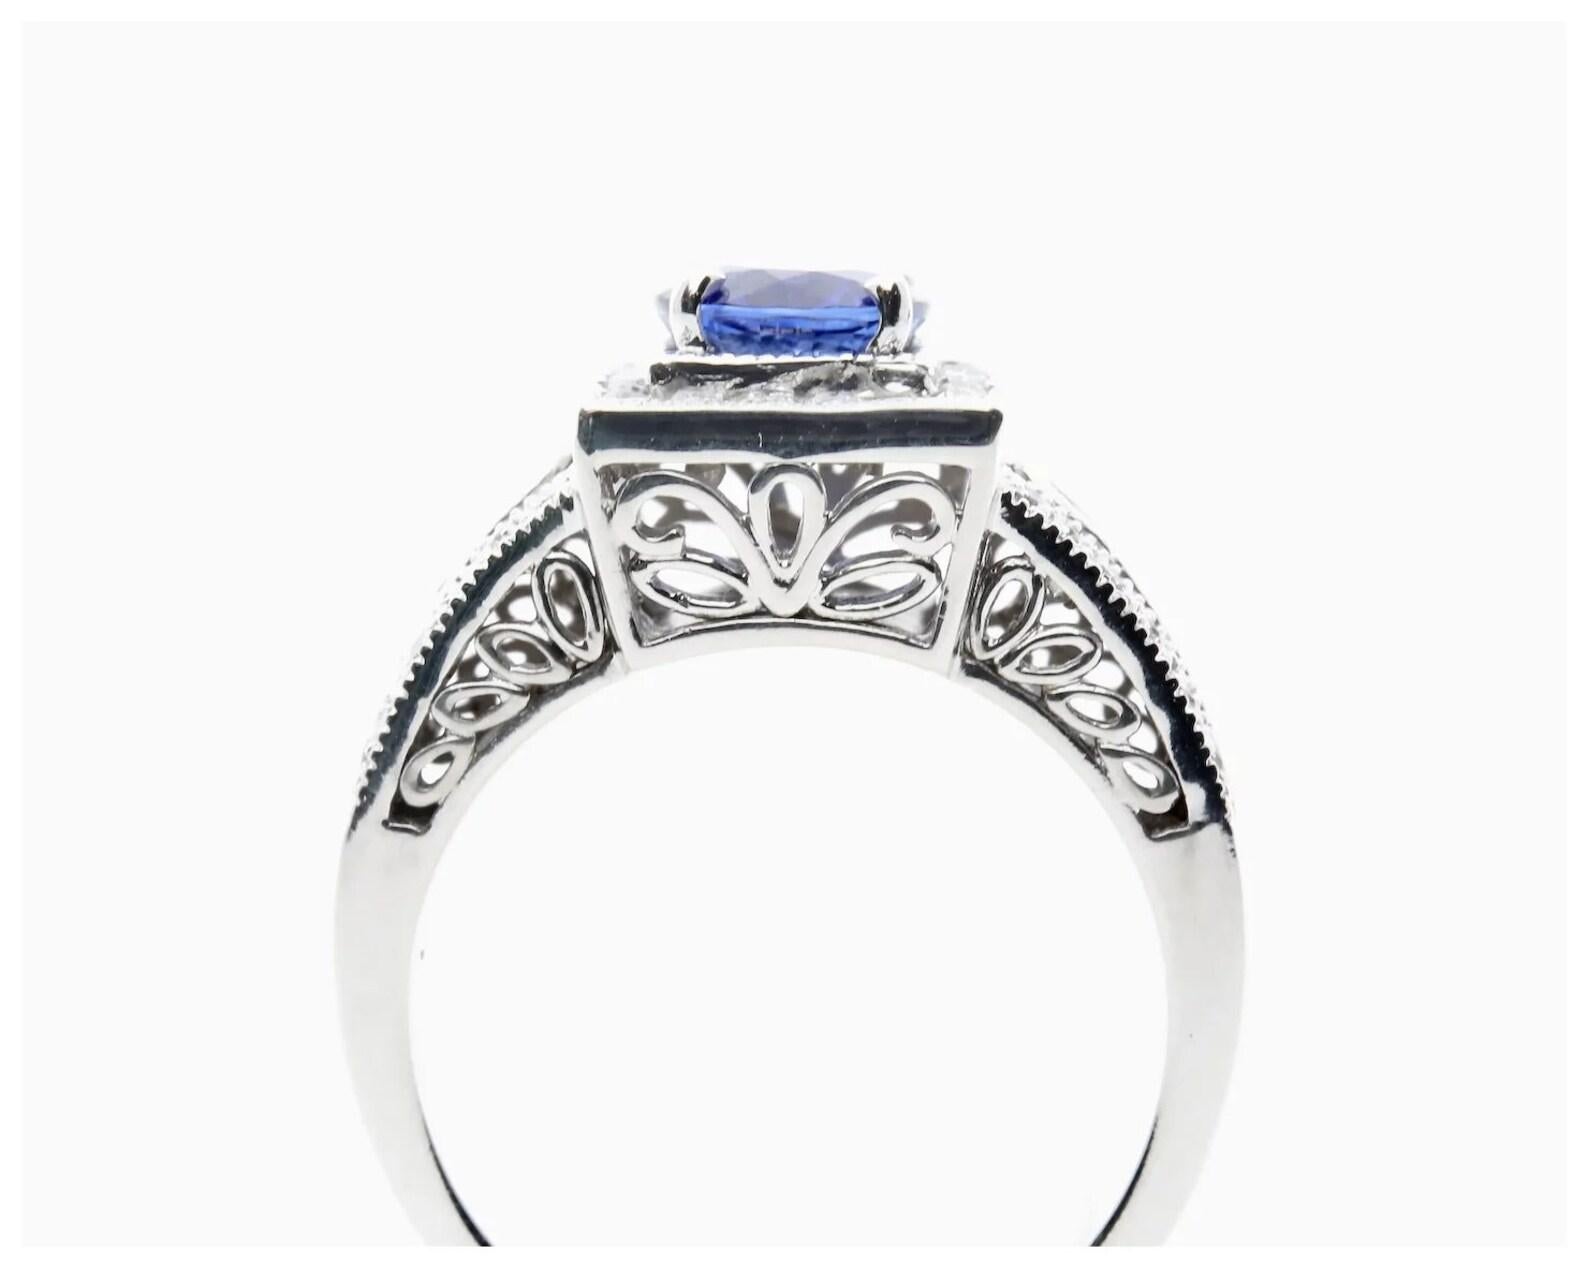 Contemporary Rich Blue 1.68ctw Sapphire & Diamond Ring in 14K White Gold In Excellent Condition For Sale In Boston, MA